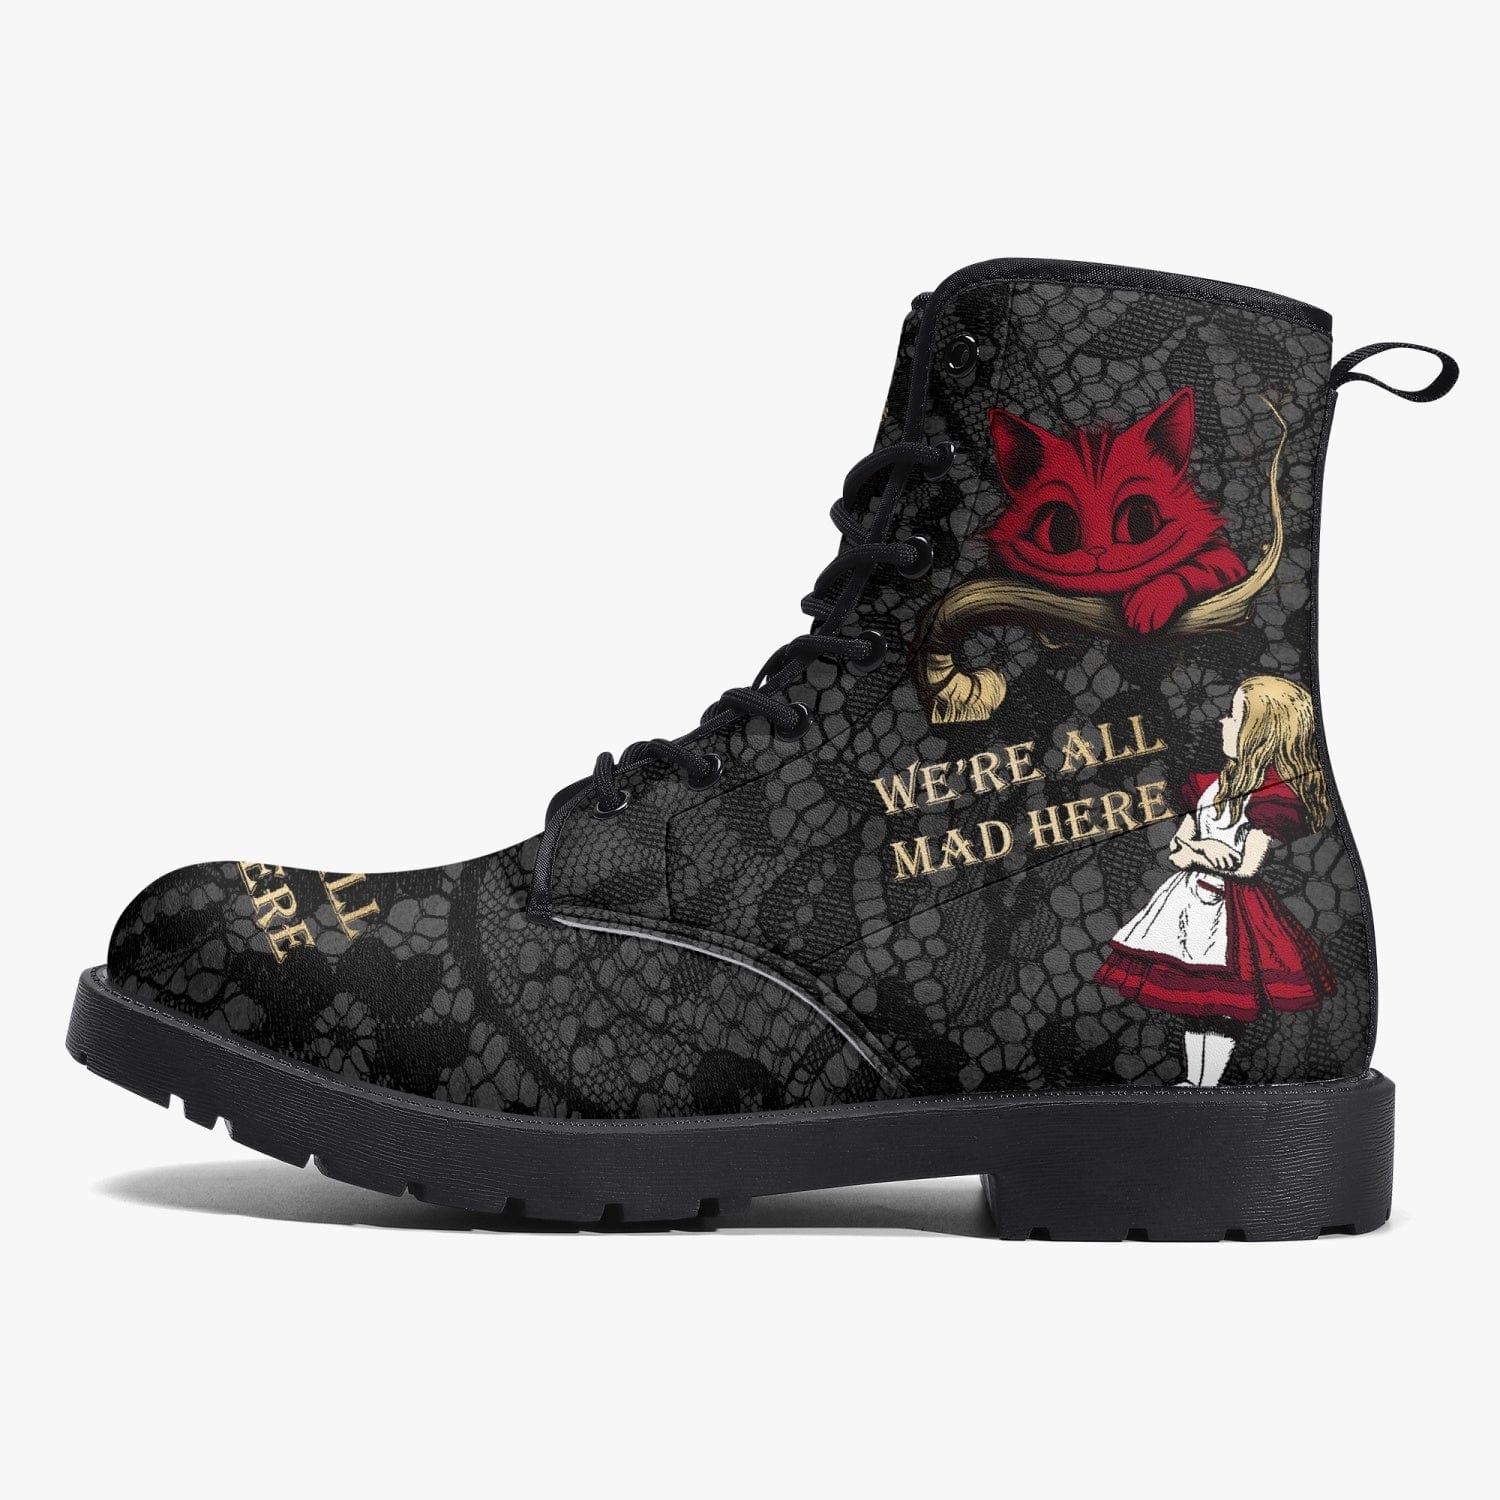 gothic black gold and red vegan boots featuring Alice in Wonderland quotes 3